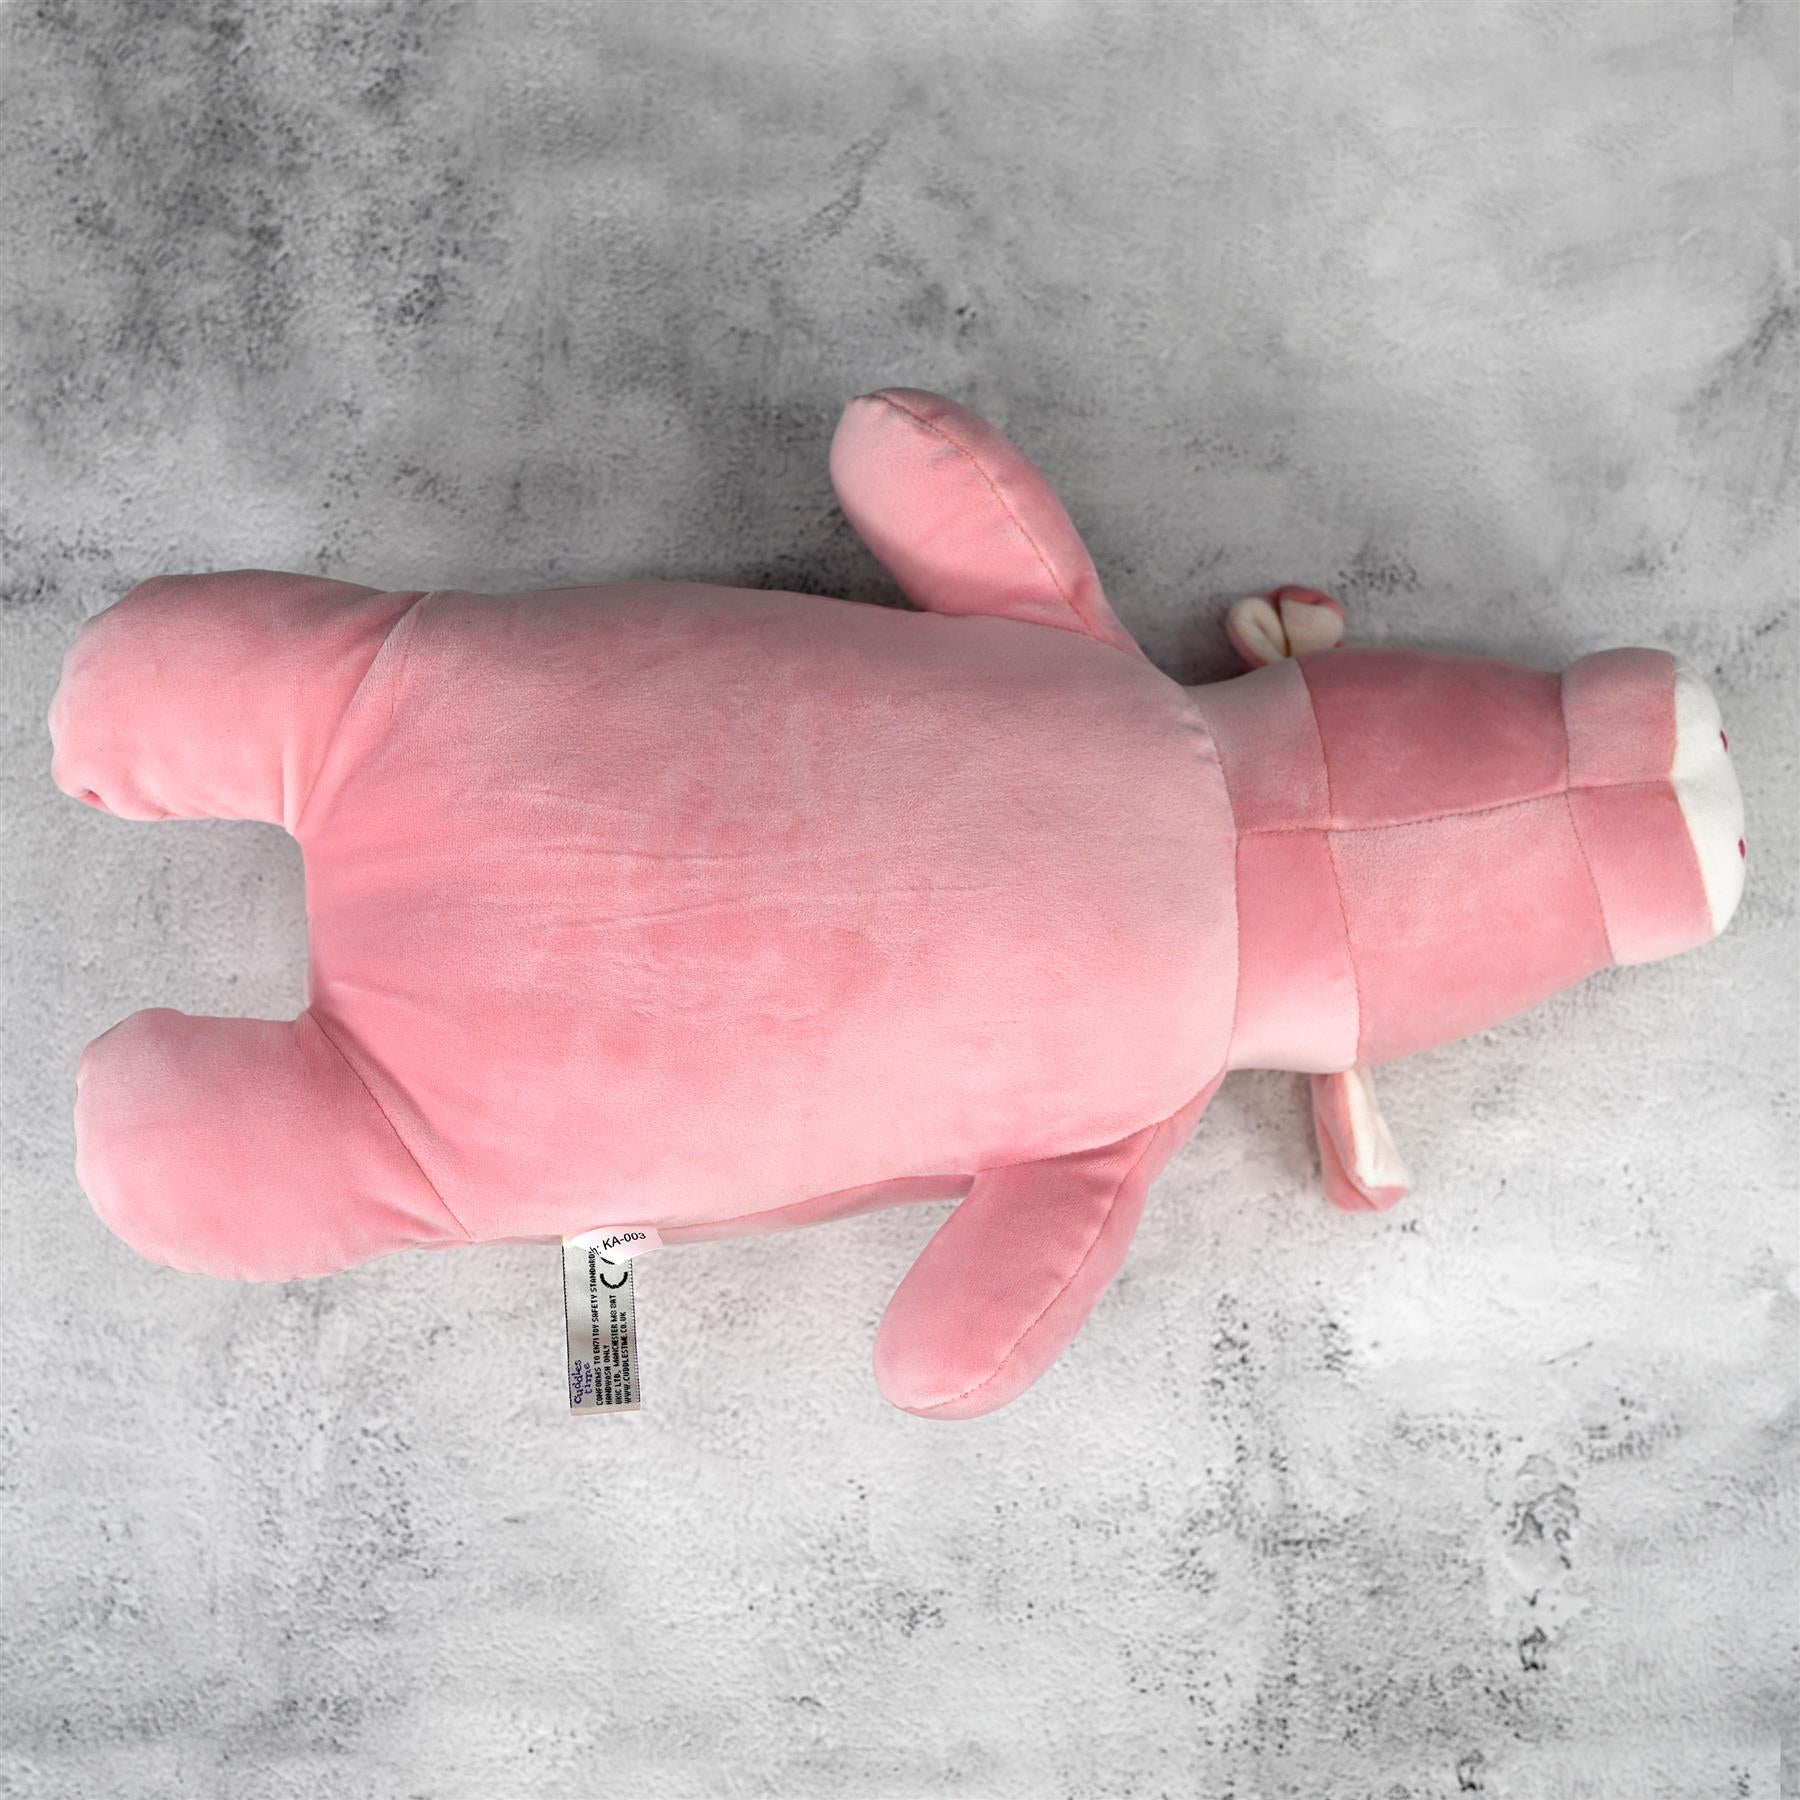 20” Super-Soft Pig Plush Pillow Toy by The Magic Toy Shop - The Magic Toy Shop